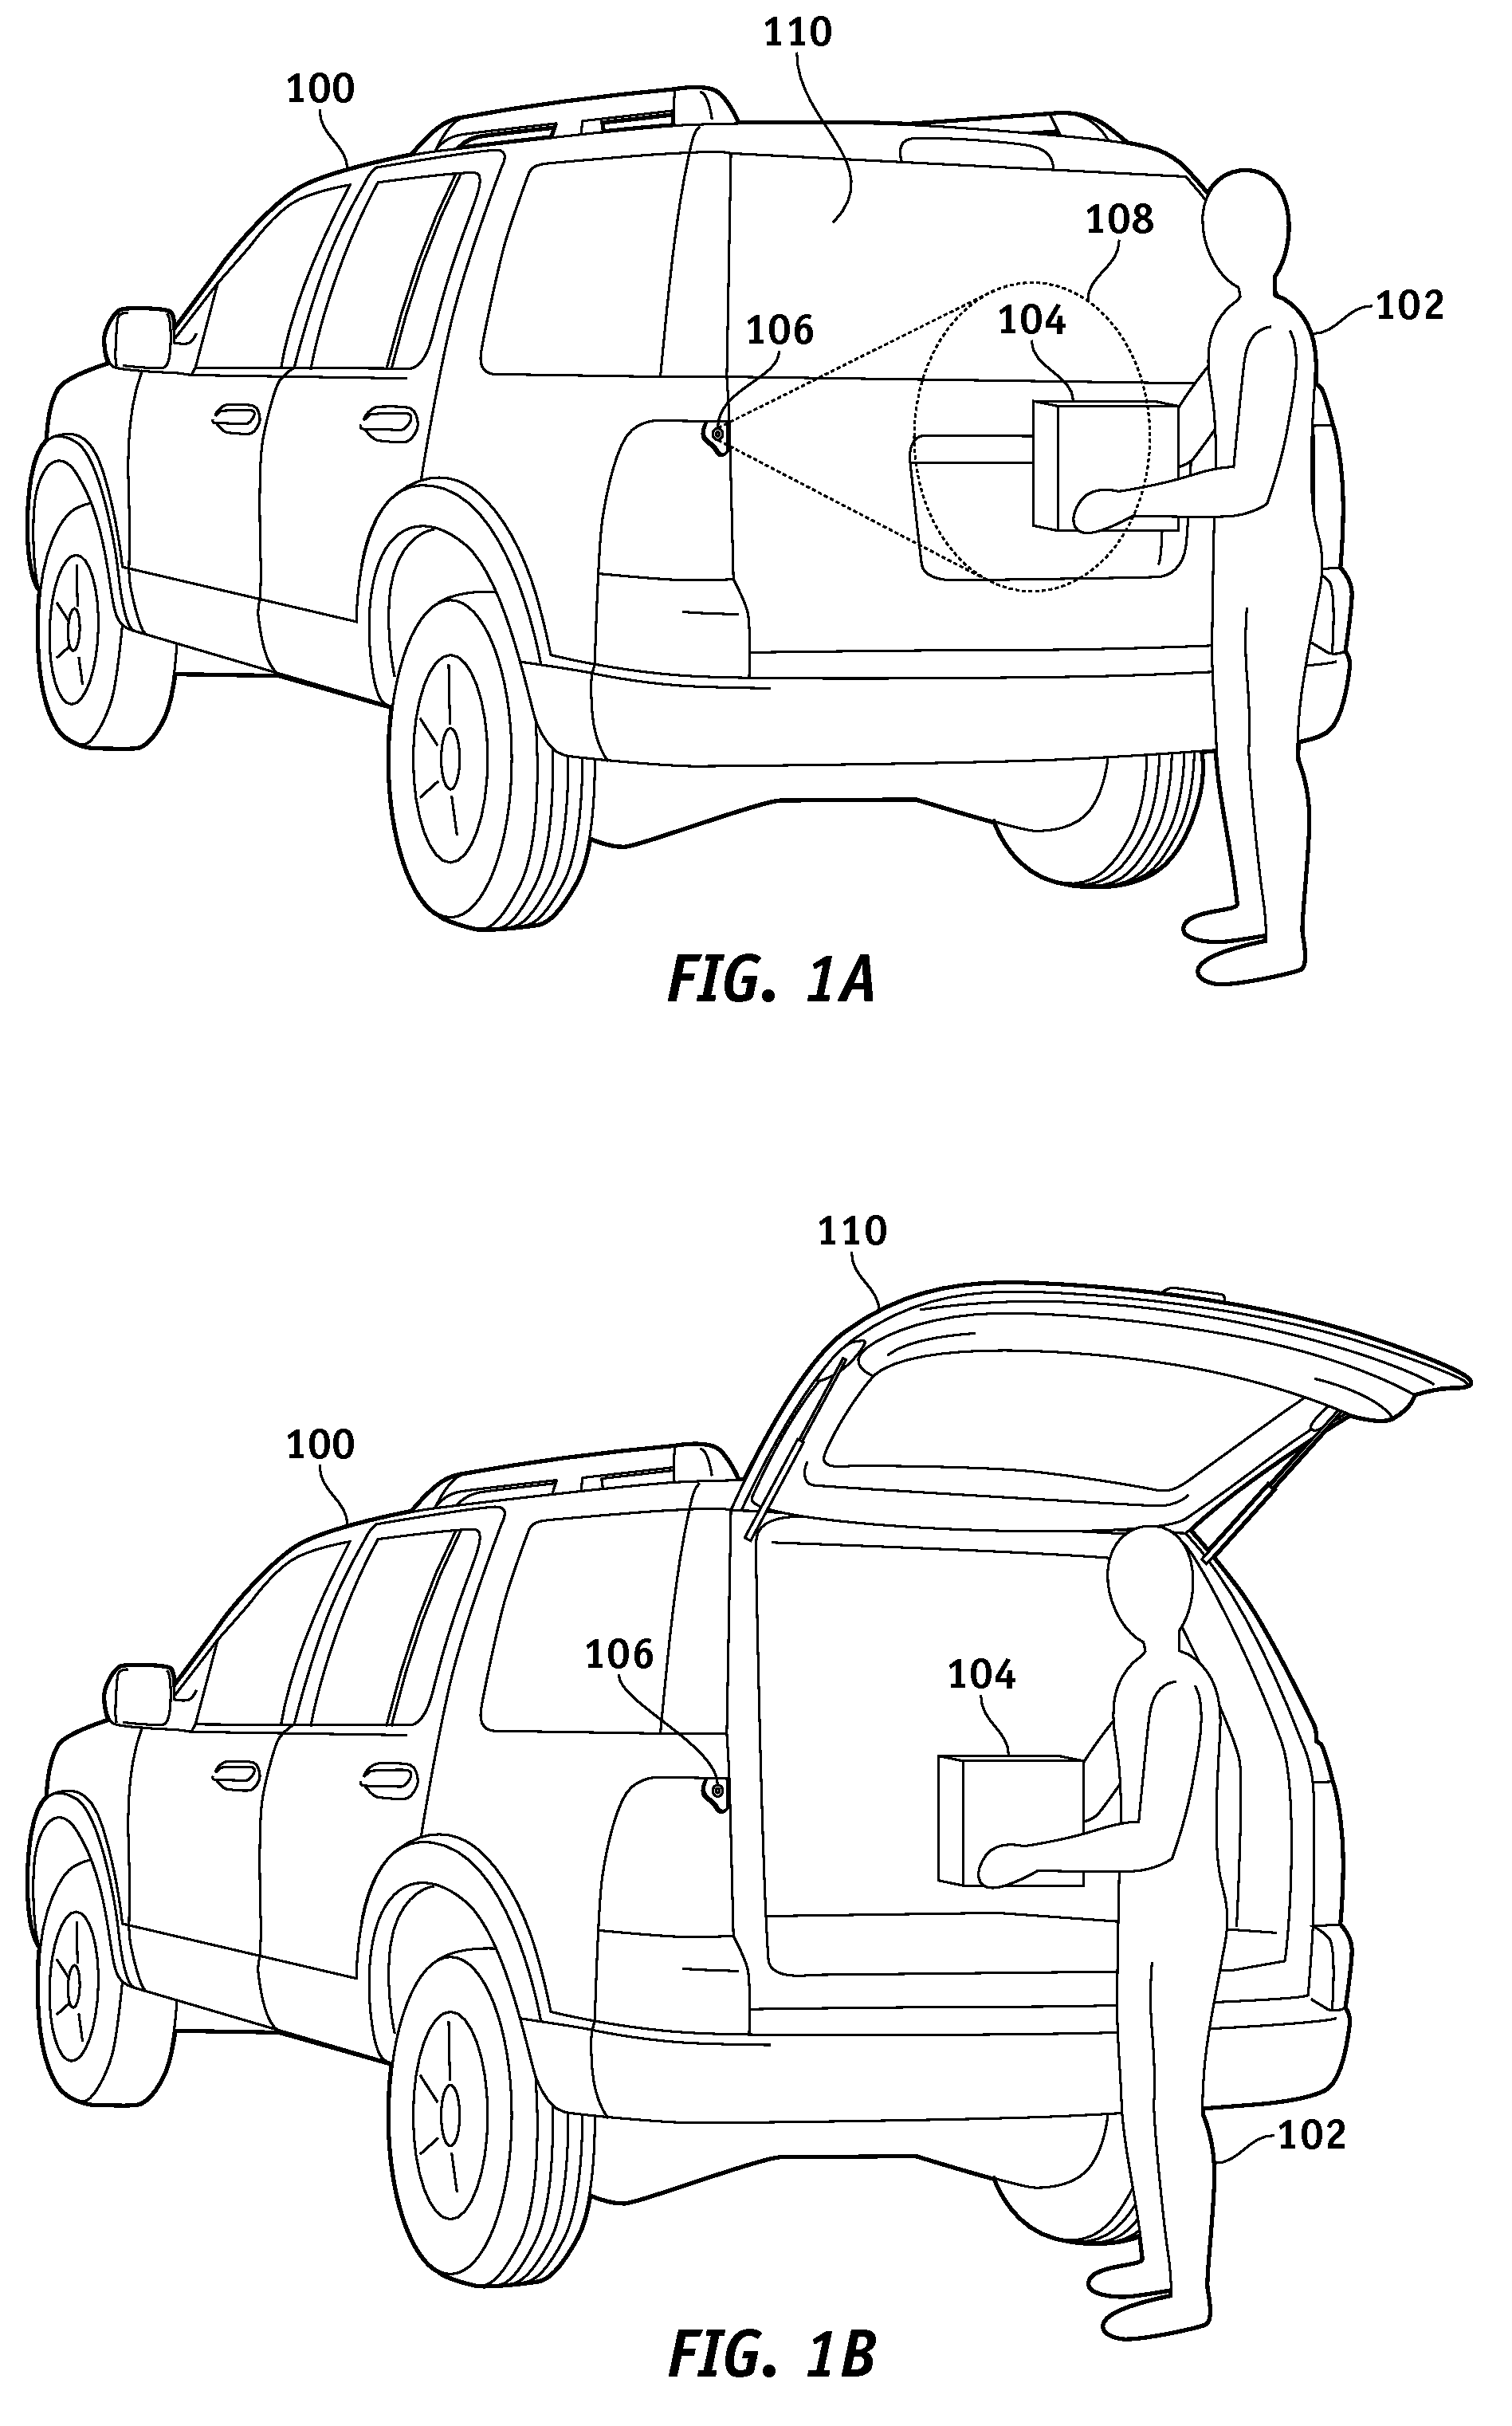 Vehicle mode activation by gesture recognition